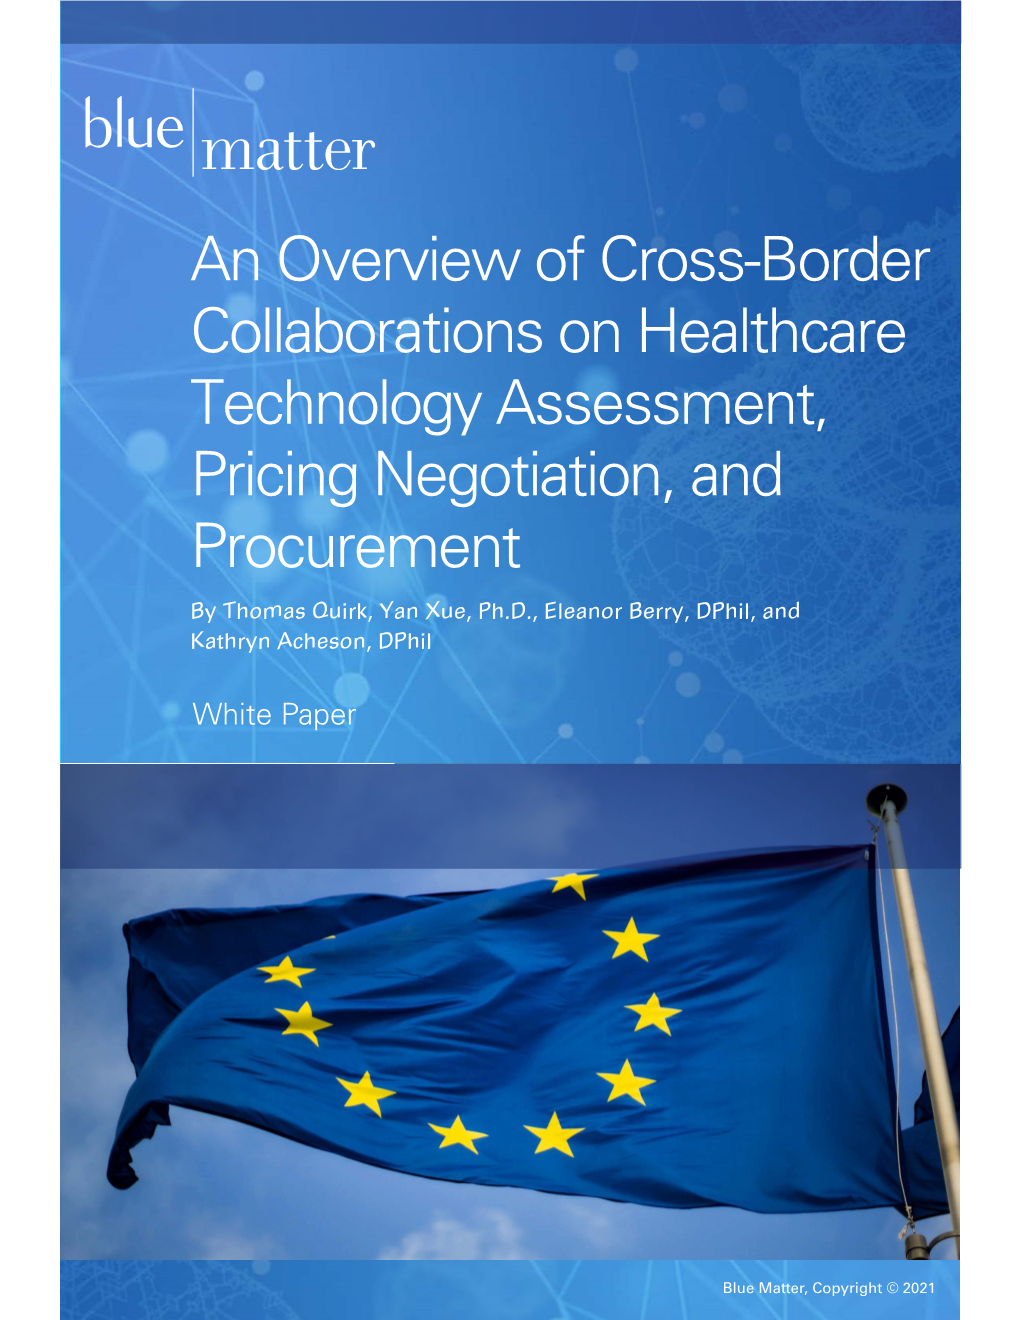 An Overview of Cross-Border Collaborations on Healthcare